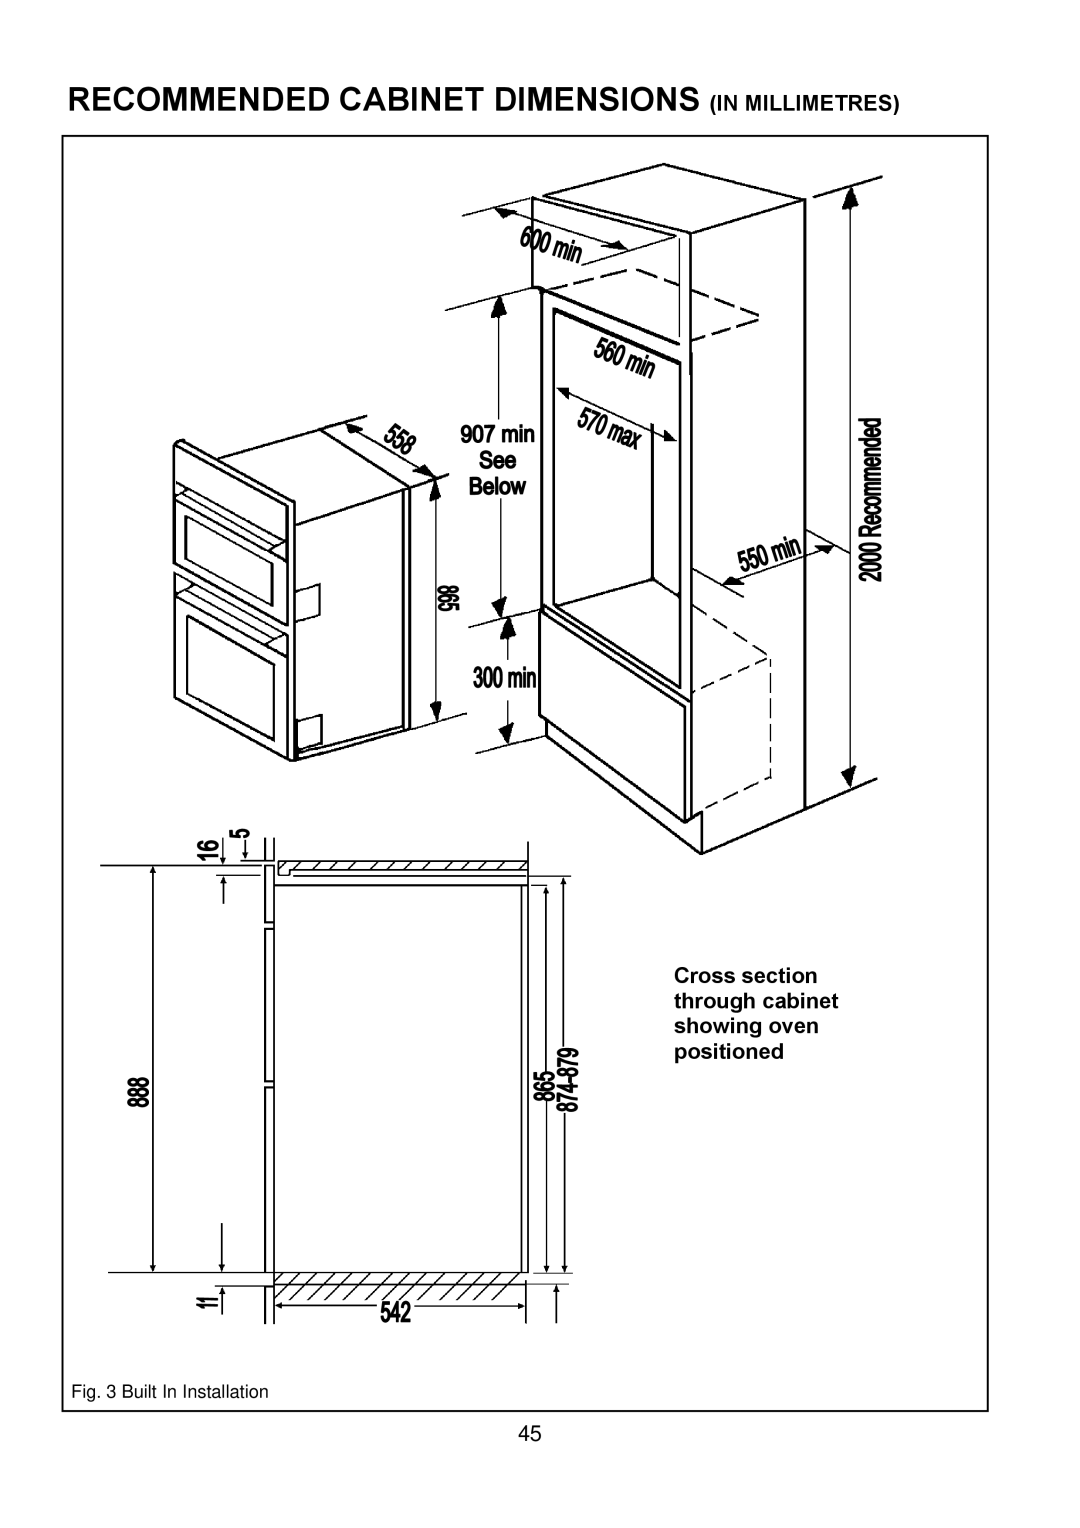 Electrolux D8800-4 operating instructions Recommended Cabinet Dimensions in Millimetres, Built In Installation 